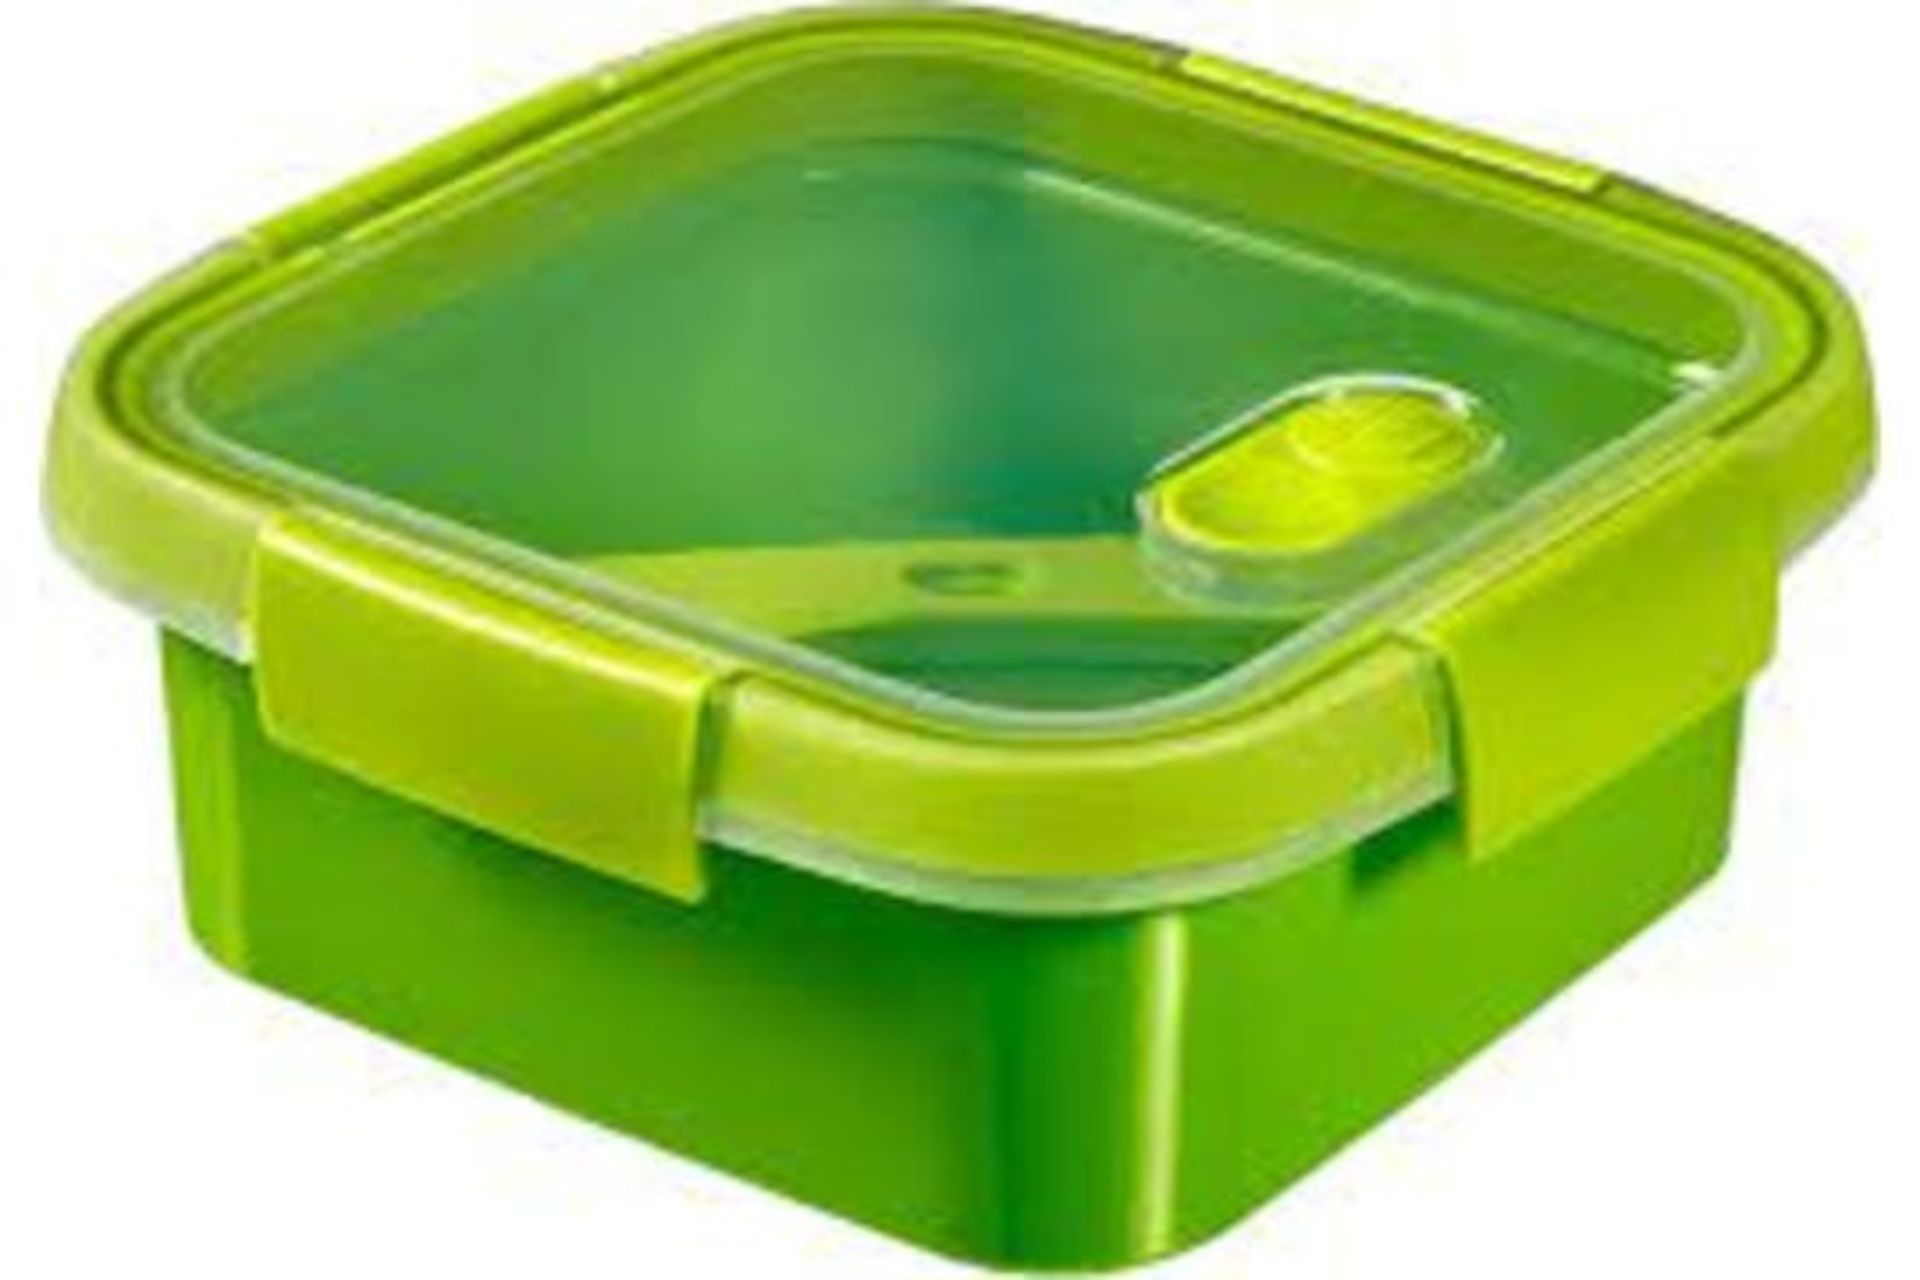 10 x NEW Curver Smart To Go - Square Lunch Box Storage Container with Knife, Fork & Spoon - Green,